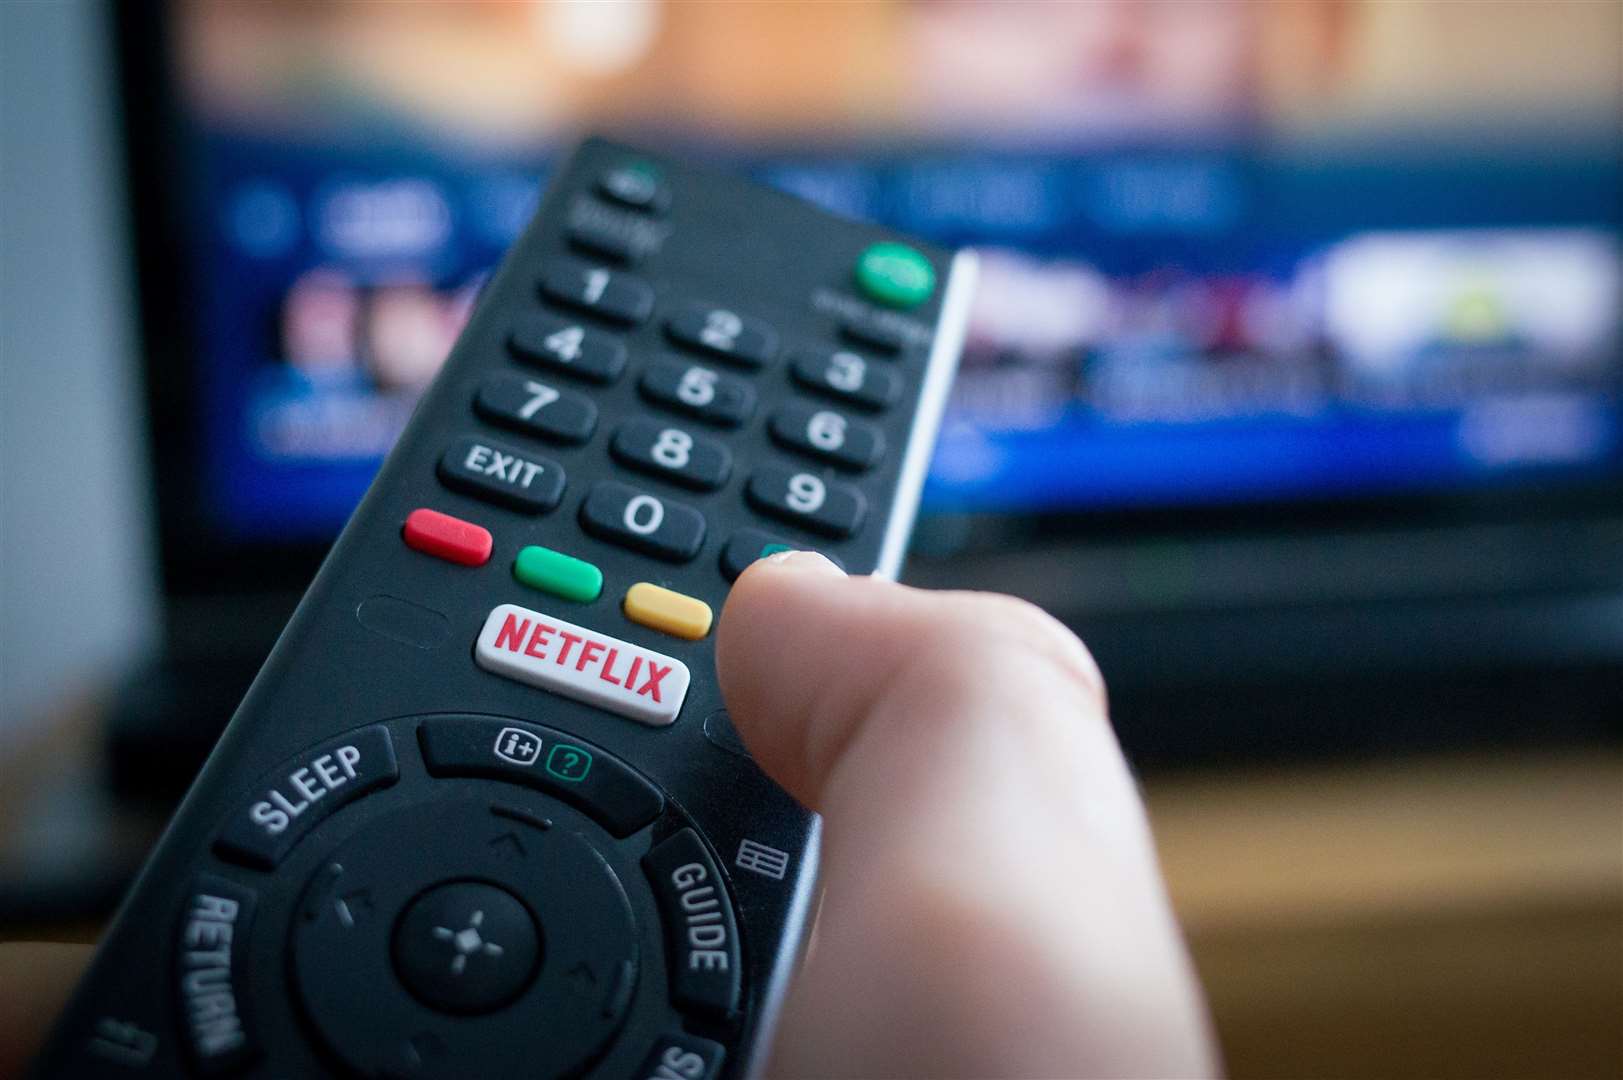 In July Netflix scapped its basic ad-free plan for new customers. Image: iStock.